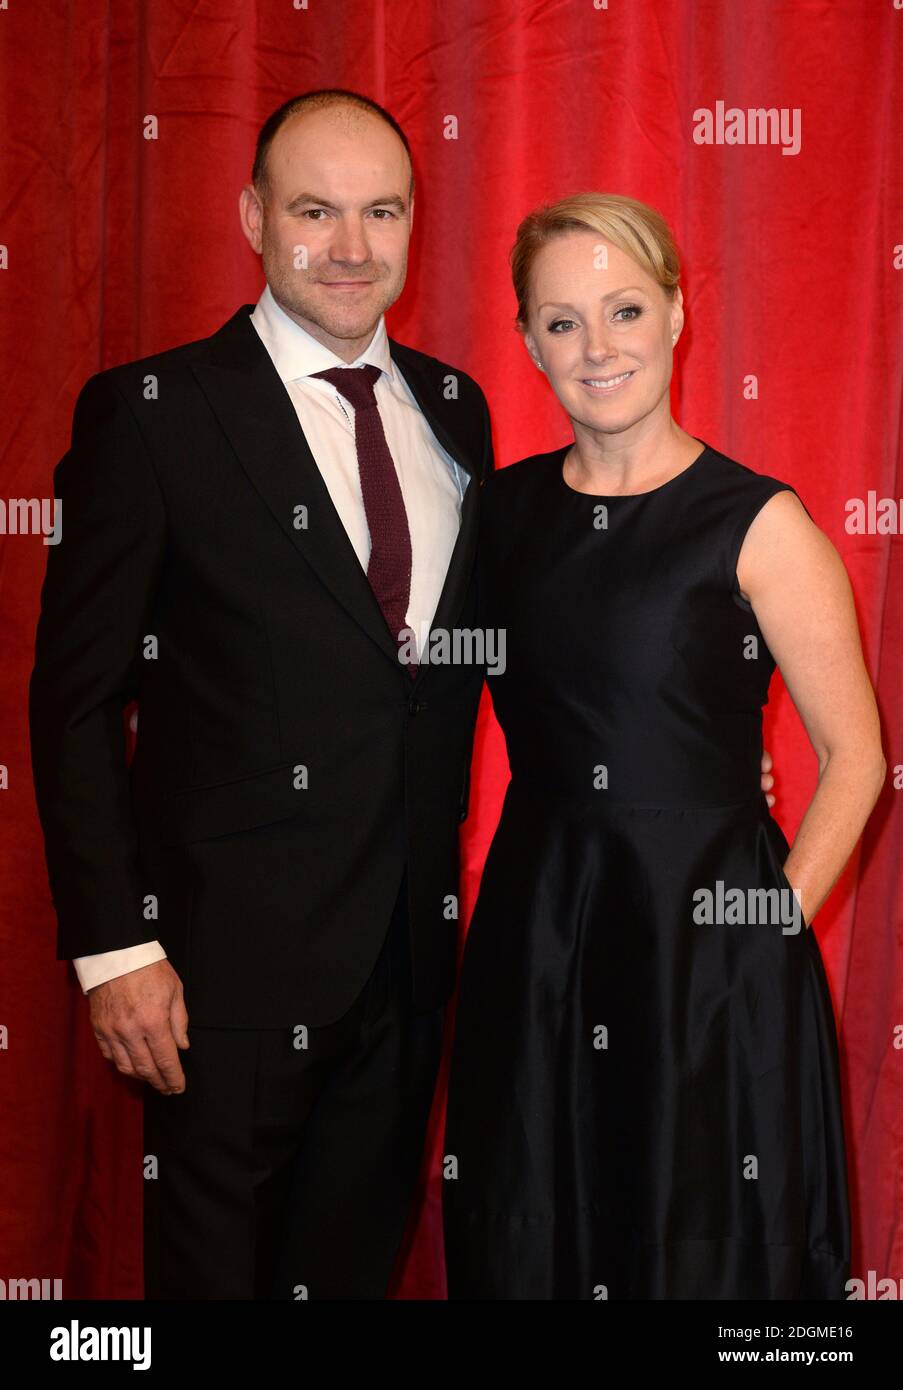 Sally Dynevor and husband attending the British Soap Awards 2016 at the Hackney Empire, 291 Mare St, London. (Mandatory credit: Doug Peters/EMPICS Entertainment)   Stock Photo